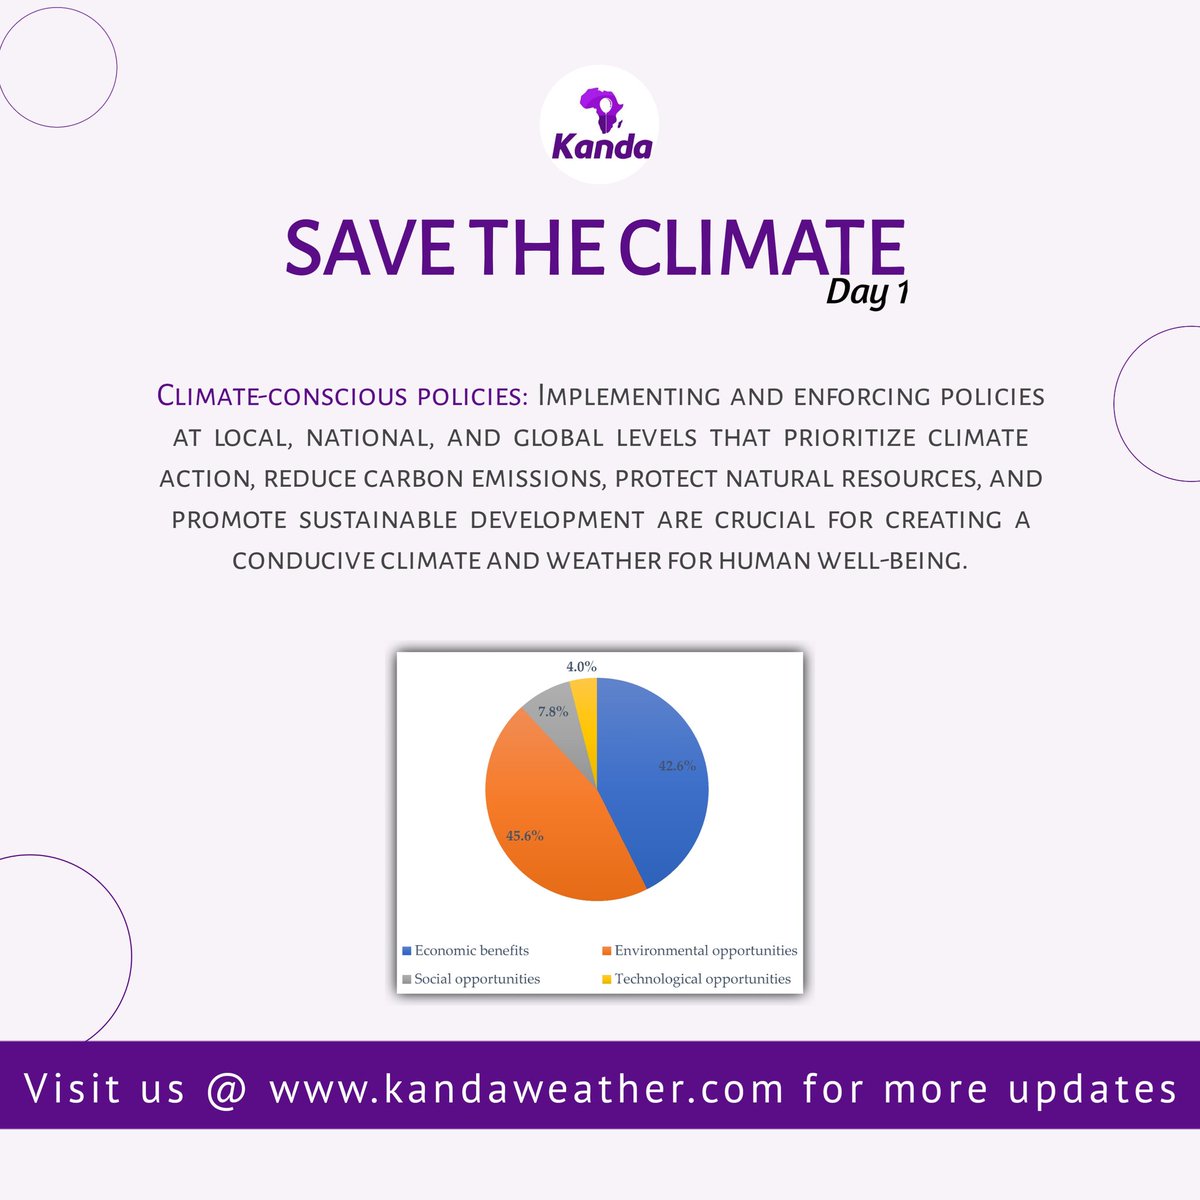 #SaveTheClimate Day1/14 Join us in creating a climate-friendly world! At #KandaWeather, we back climate-conscious policies, reduce carbon emissions, and promote sustainable development. Together, let's ensure a brighter future! 🌍💚 #ClimateAction #SustainableDevelopment